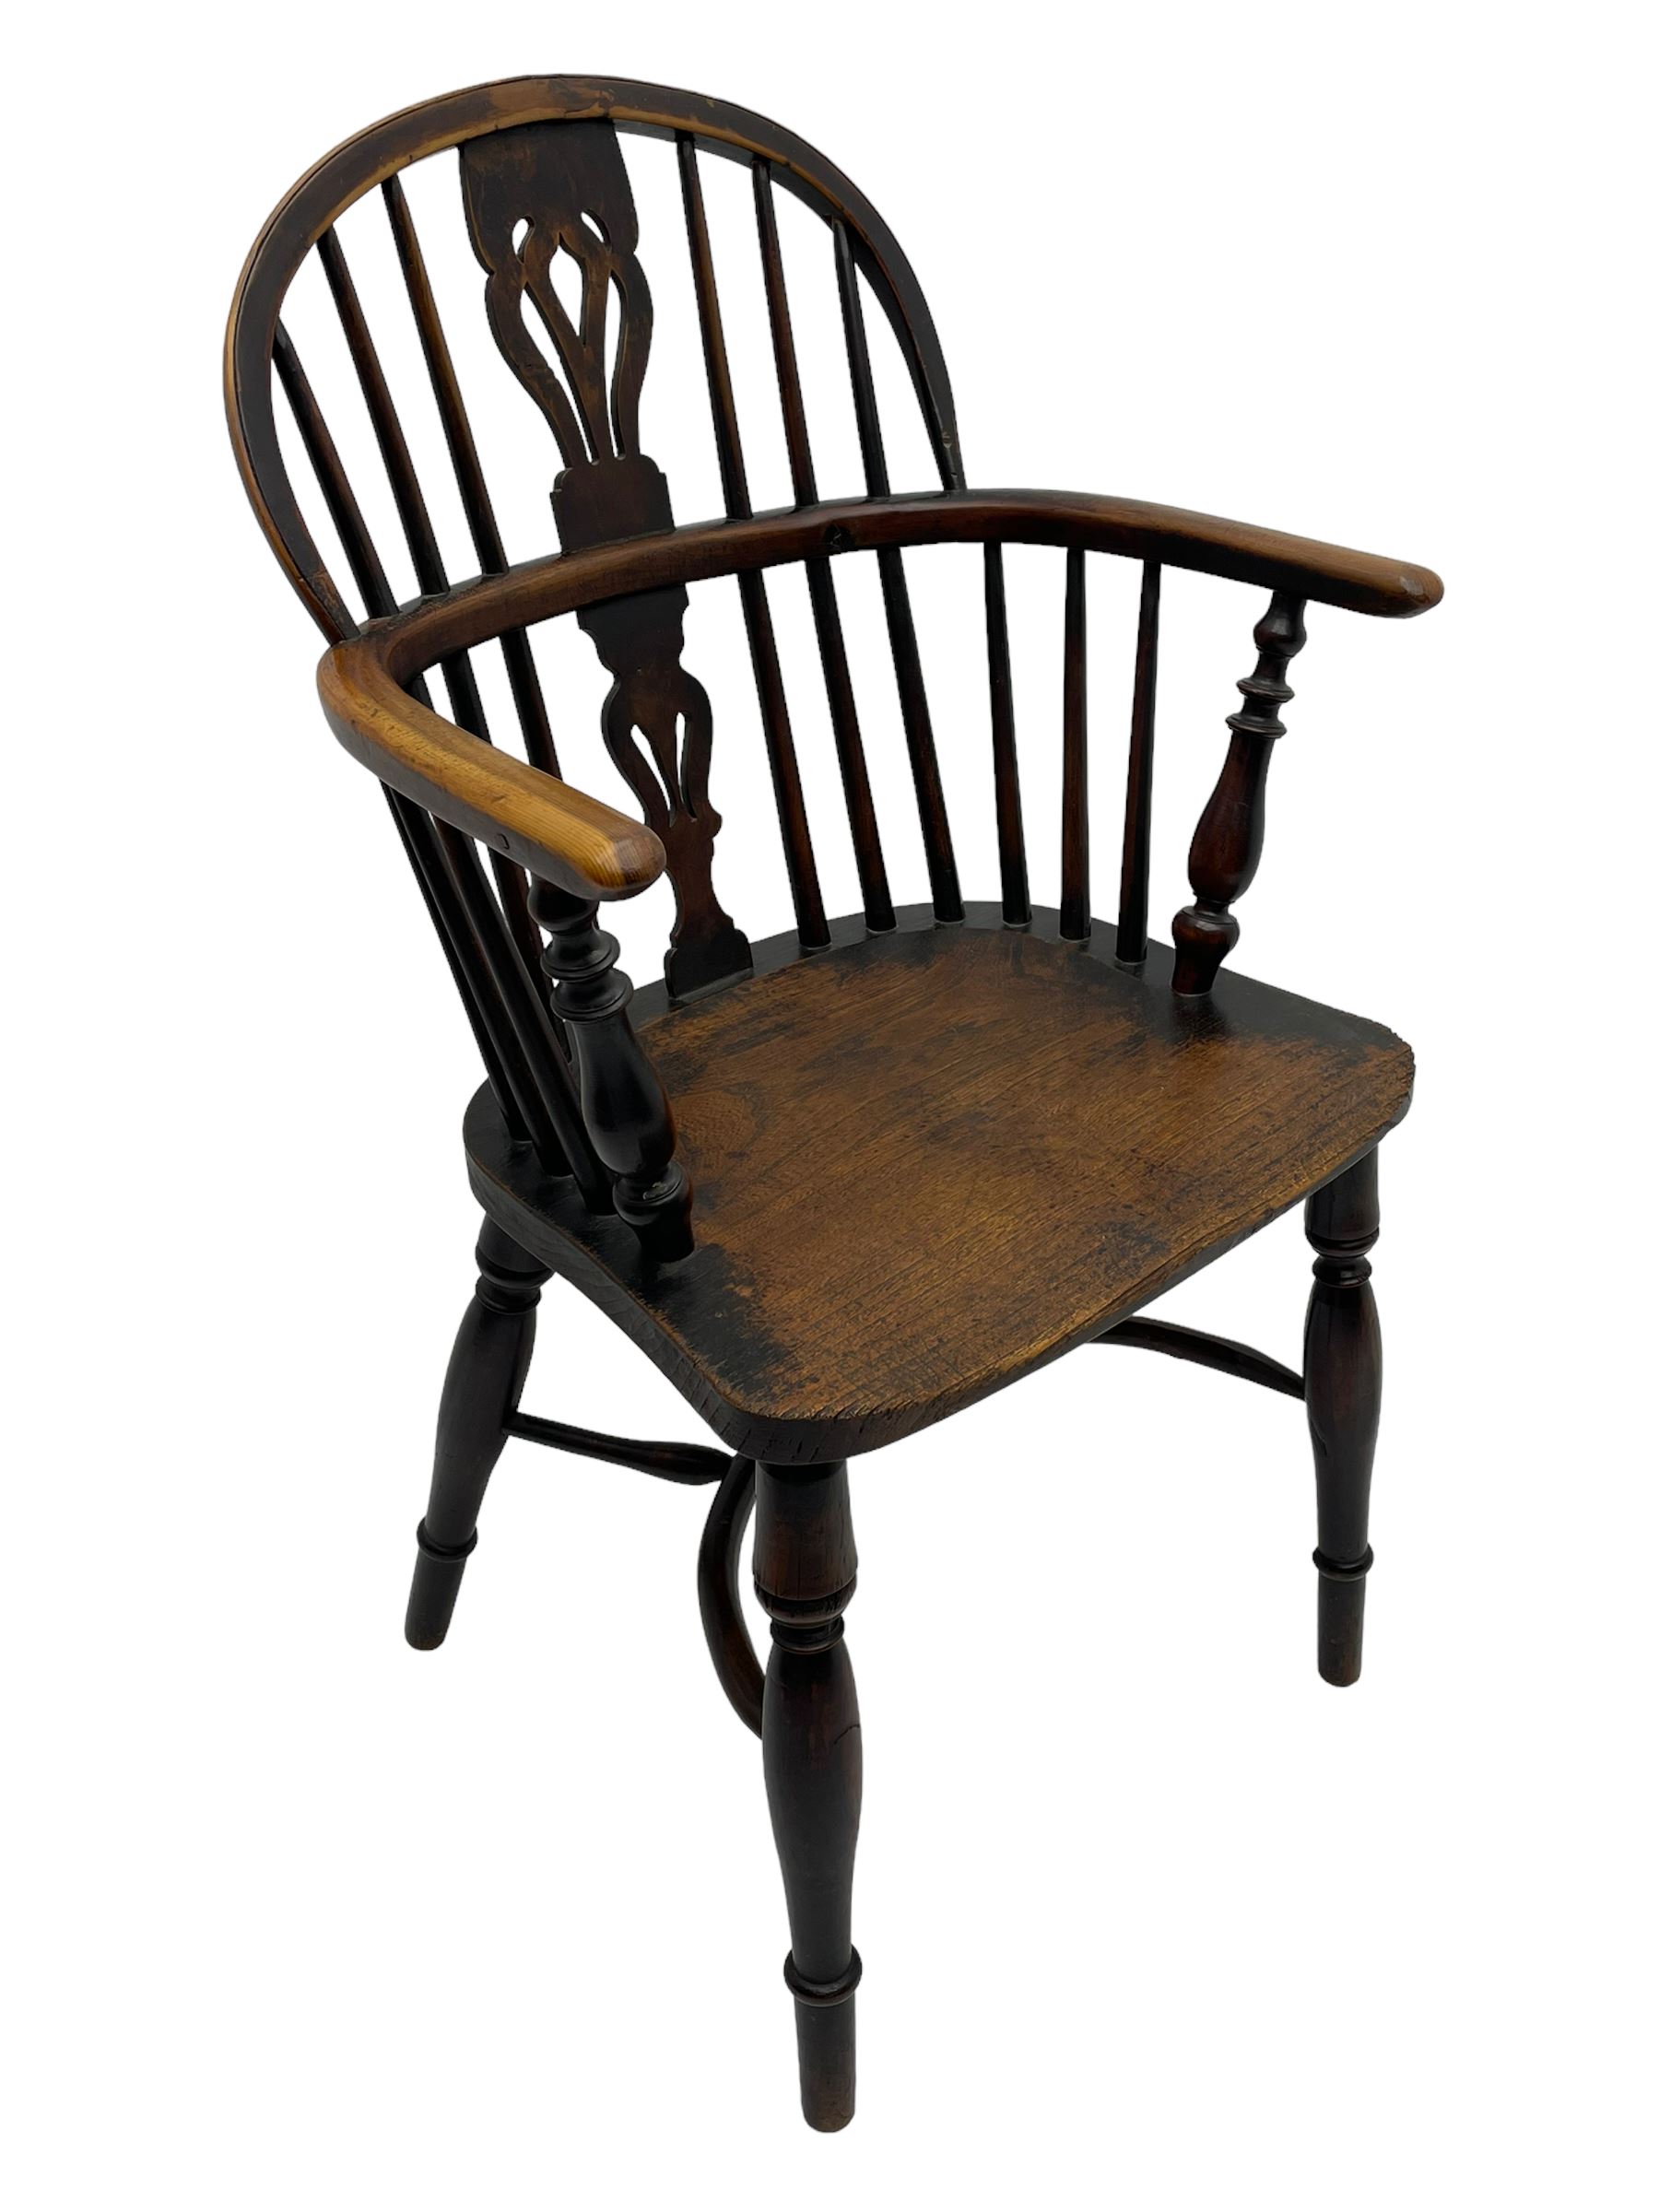 19th century yew wood and elm Windsor chair - Image 3 of 9